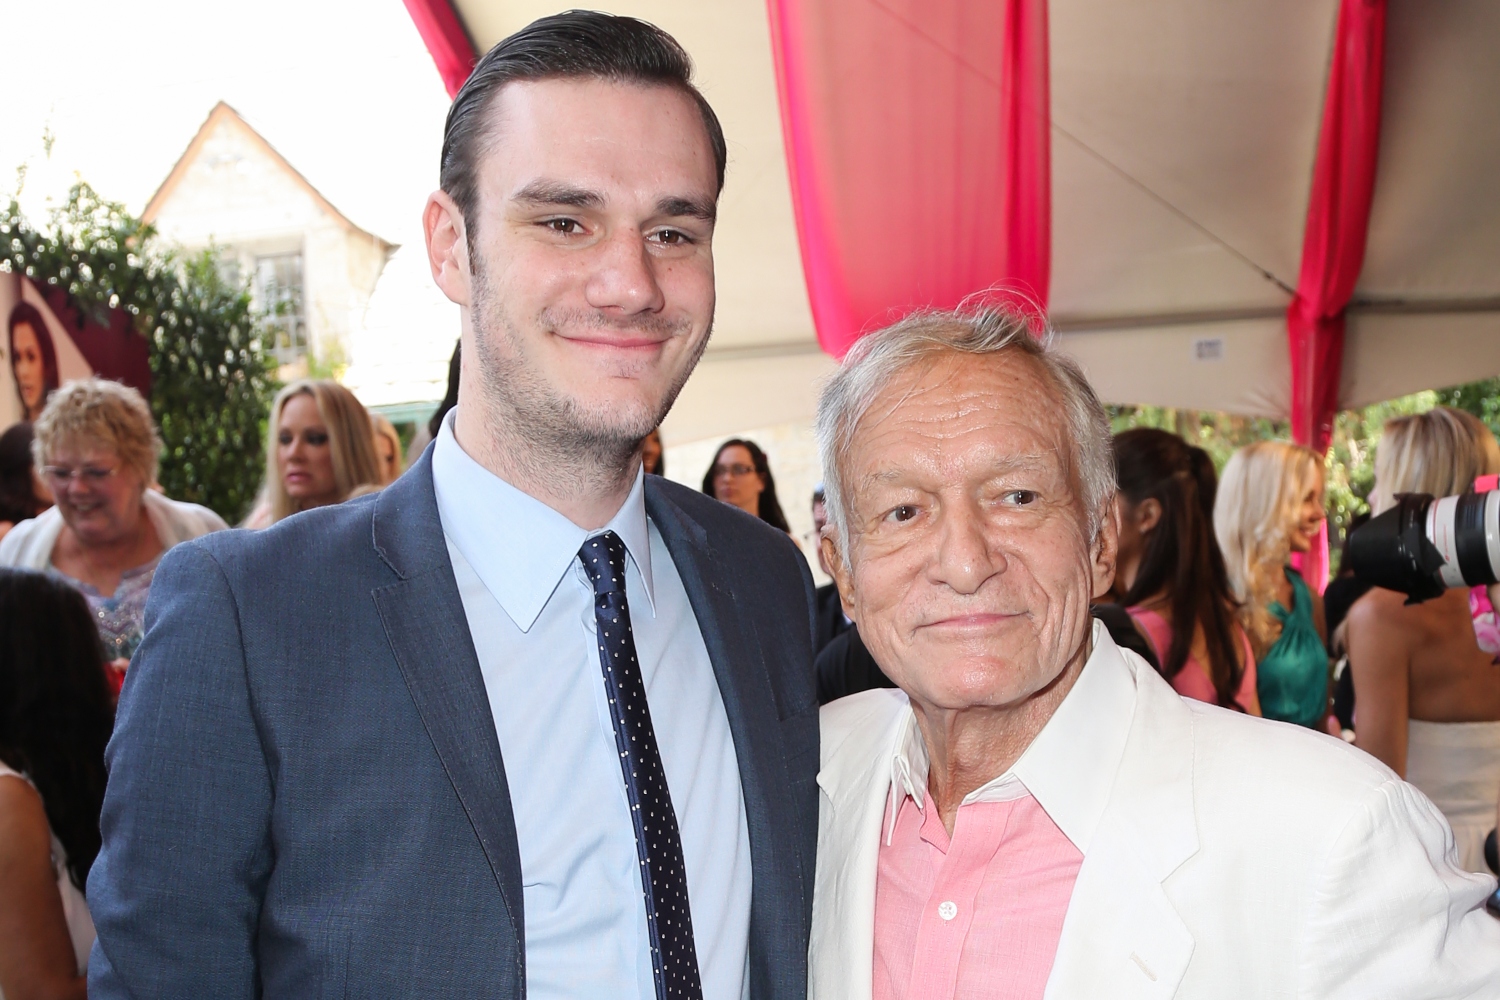 Playboy Founder Hugh Hefner (R) and and his son Cooper Hefner (L) attend the 2013 Playmate Of The Year announcement at The Playboy Mansion on May 9, 2013 in Beverly Hills, California.